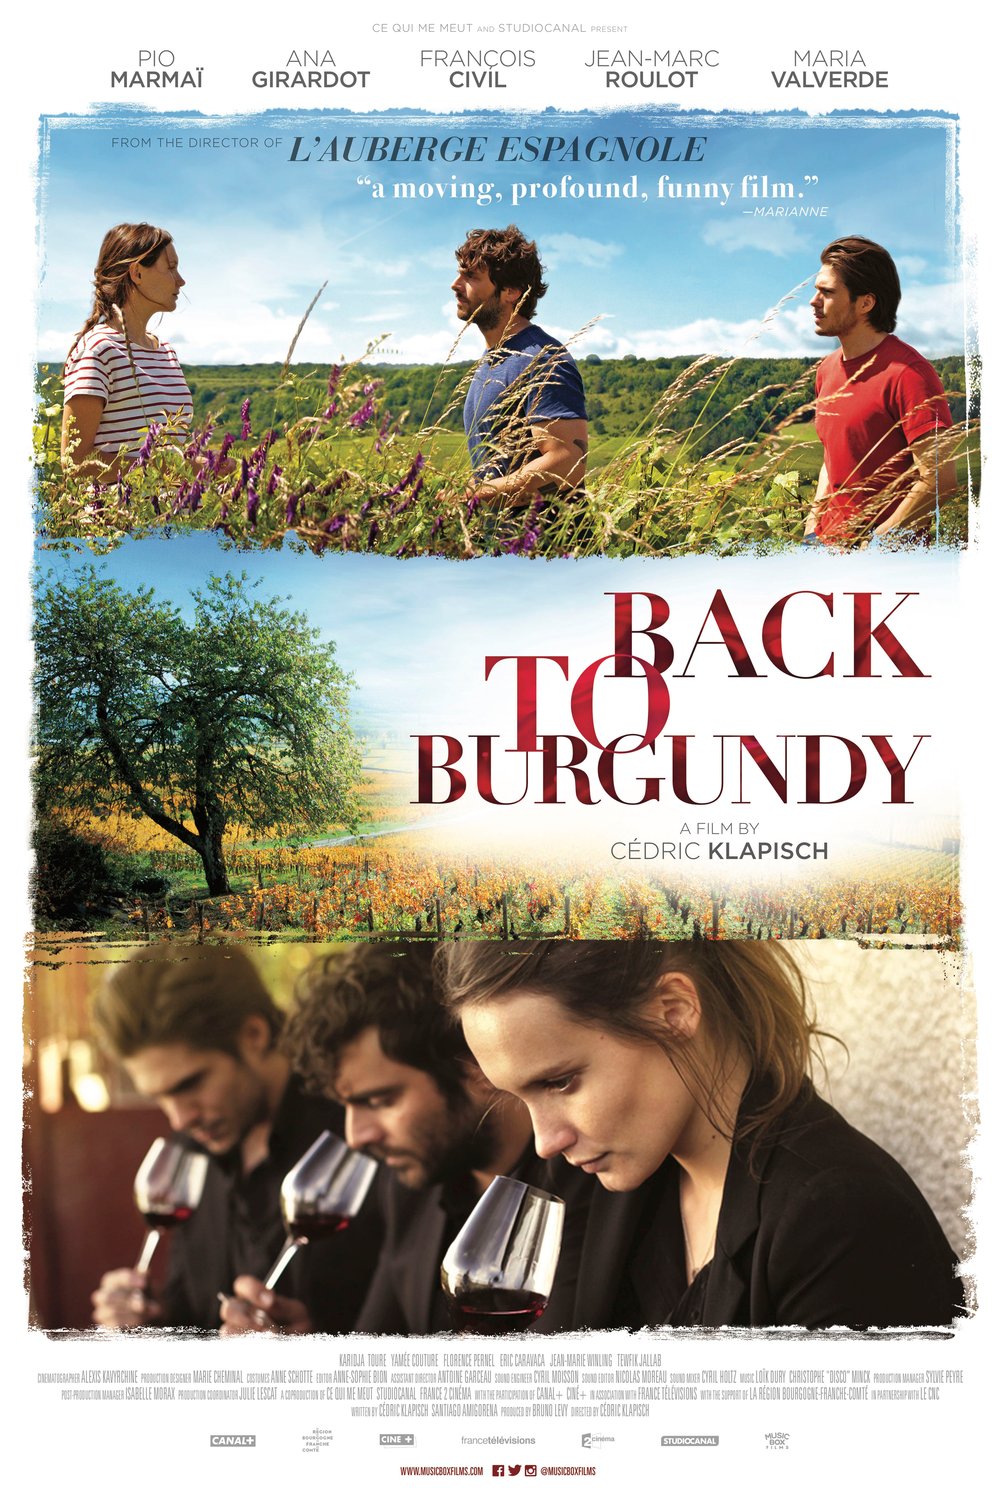 Poster of the movie Back to Burgundy